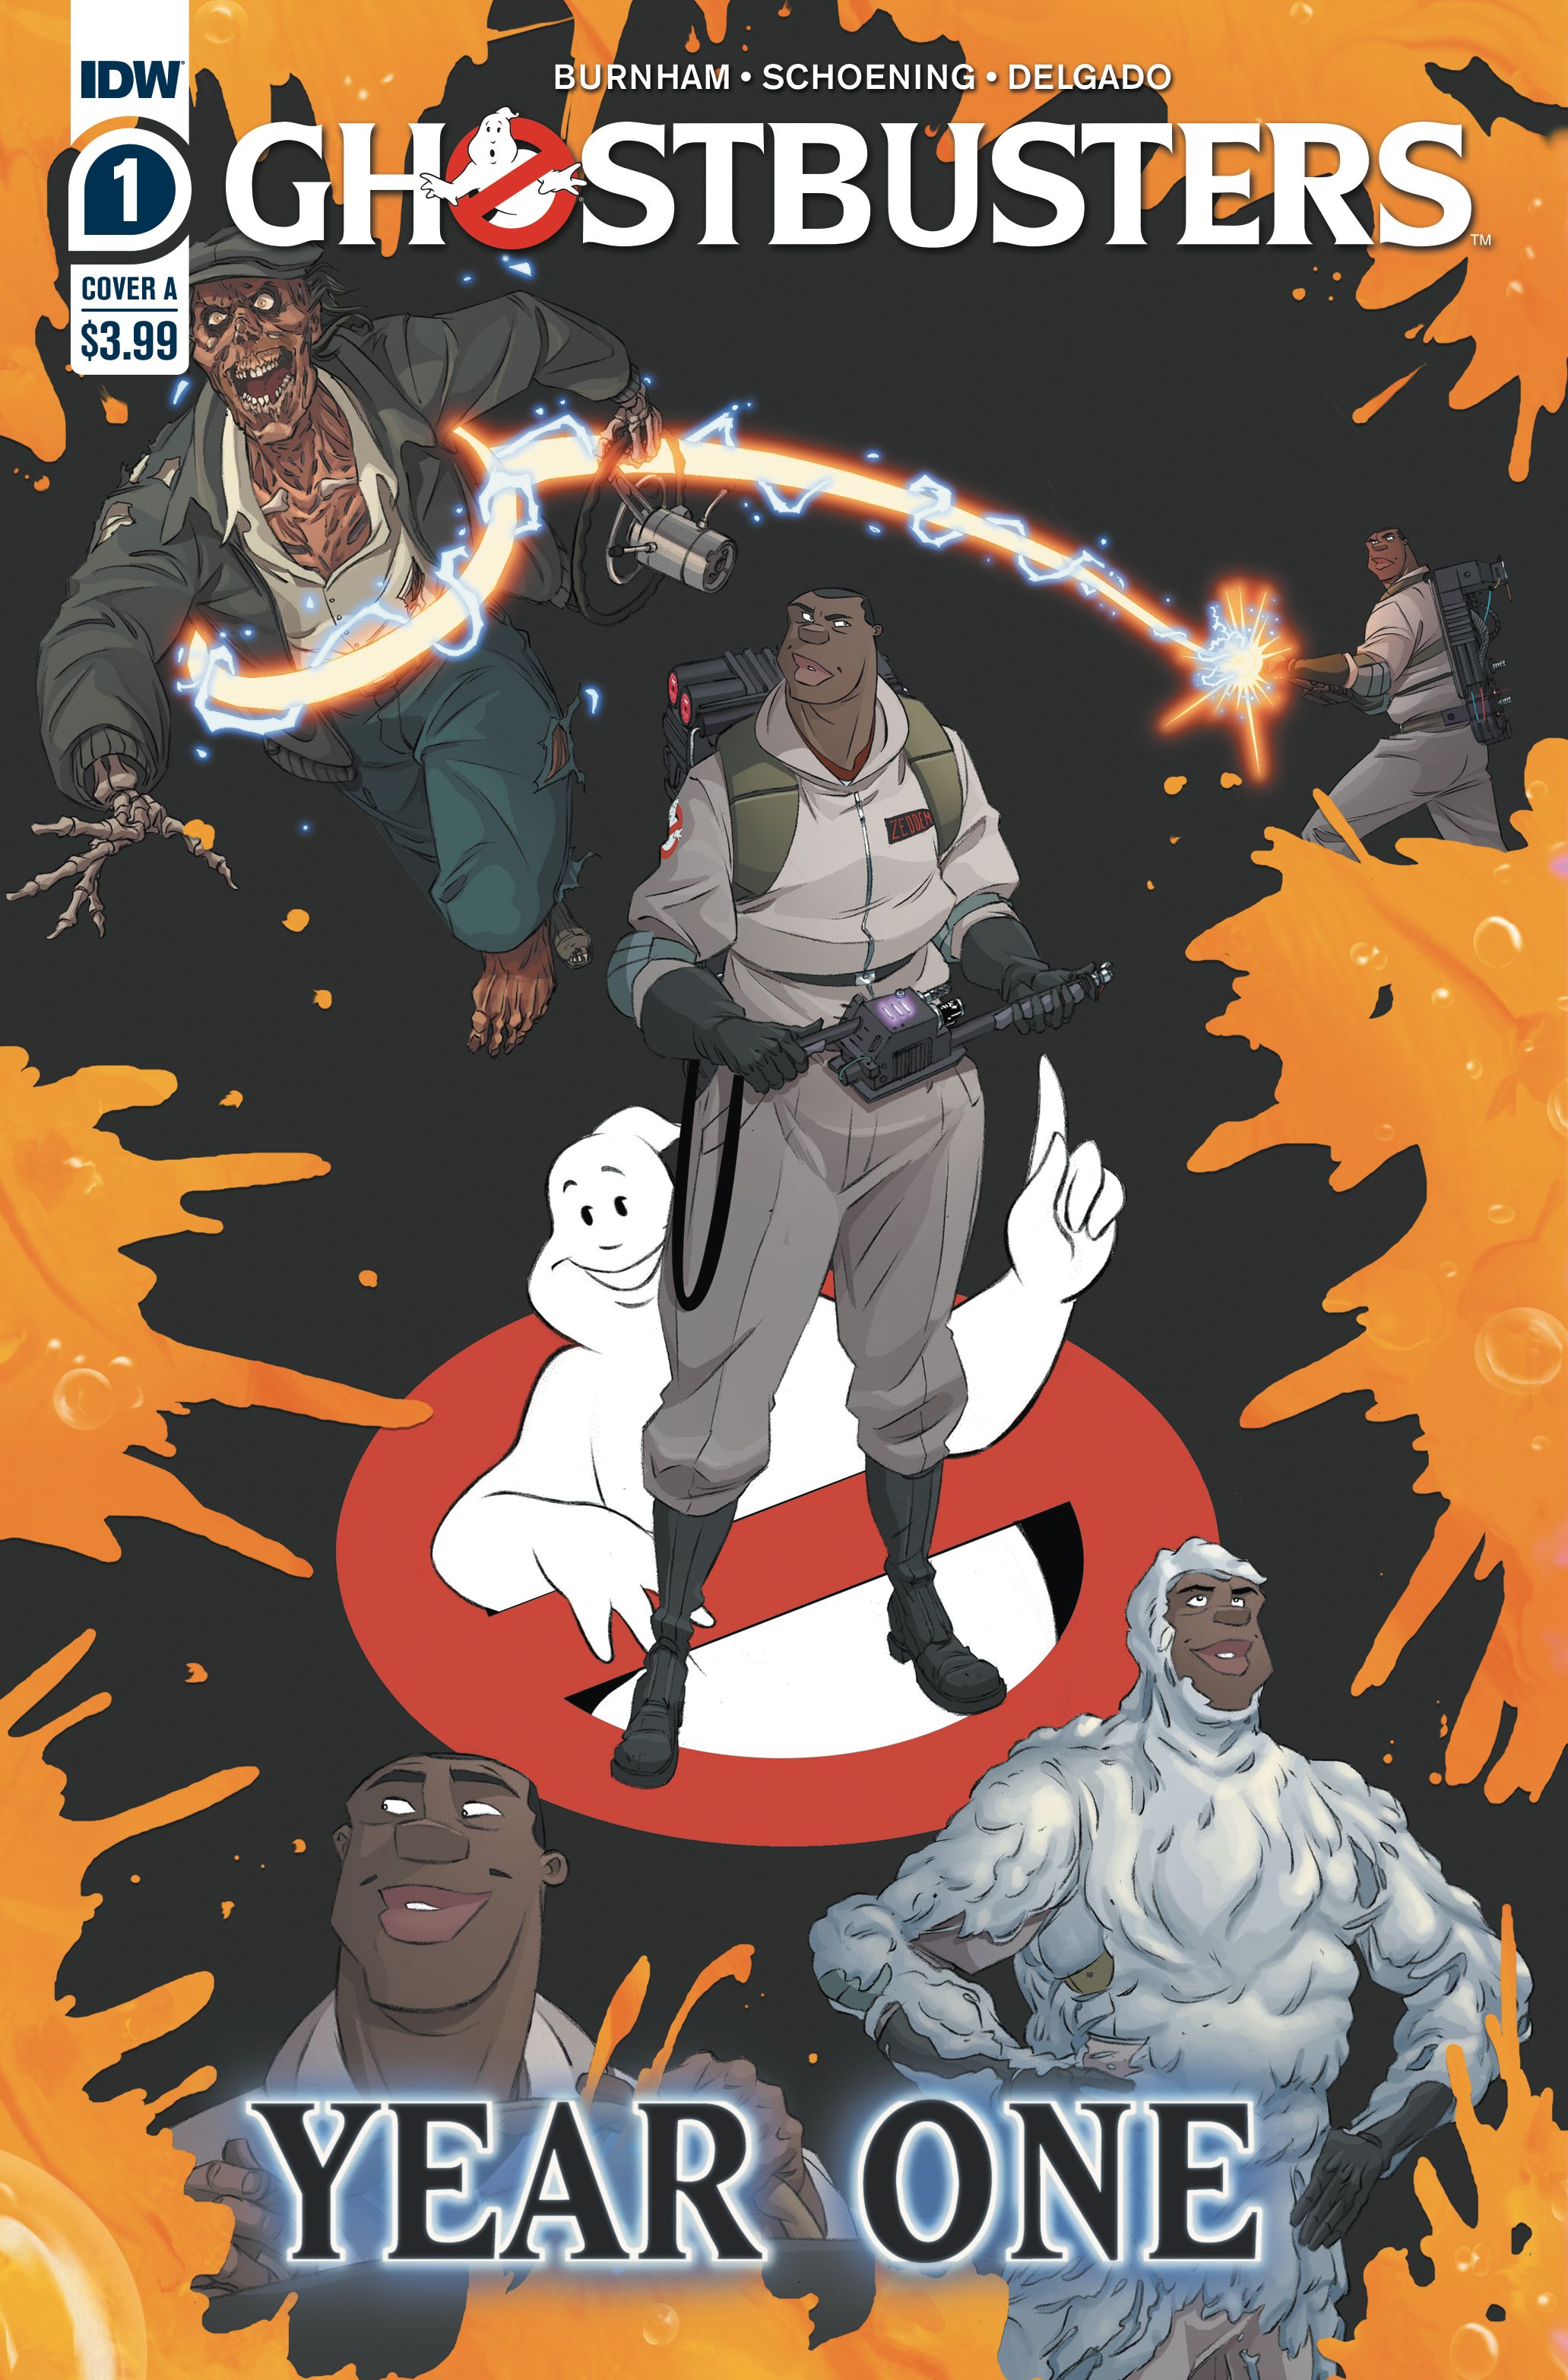 Ghostbusters: Year One #1 Comic